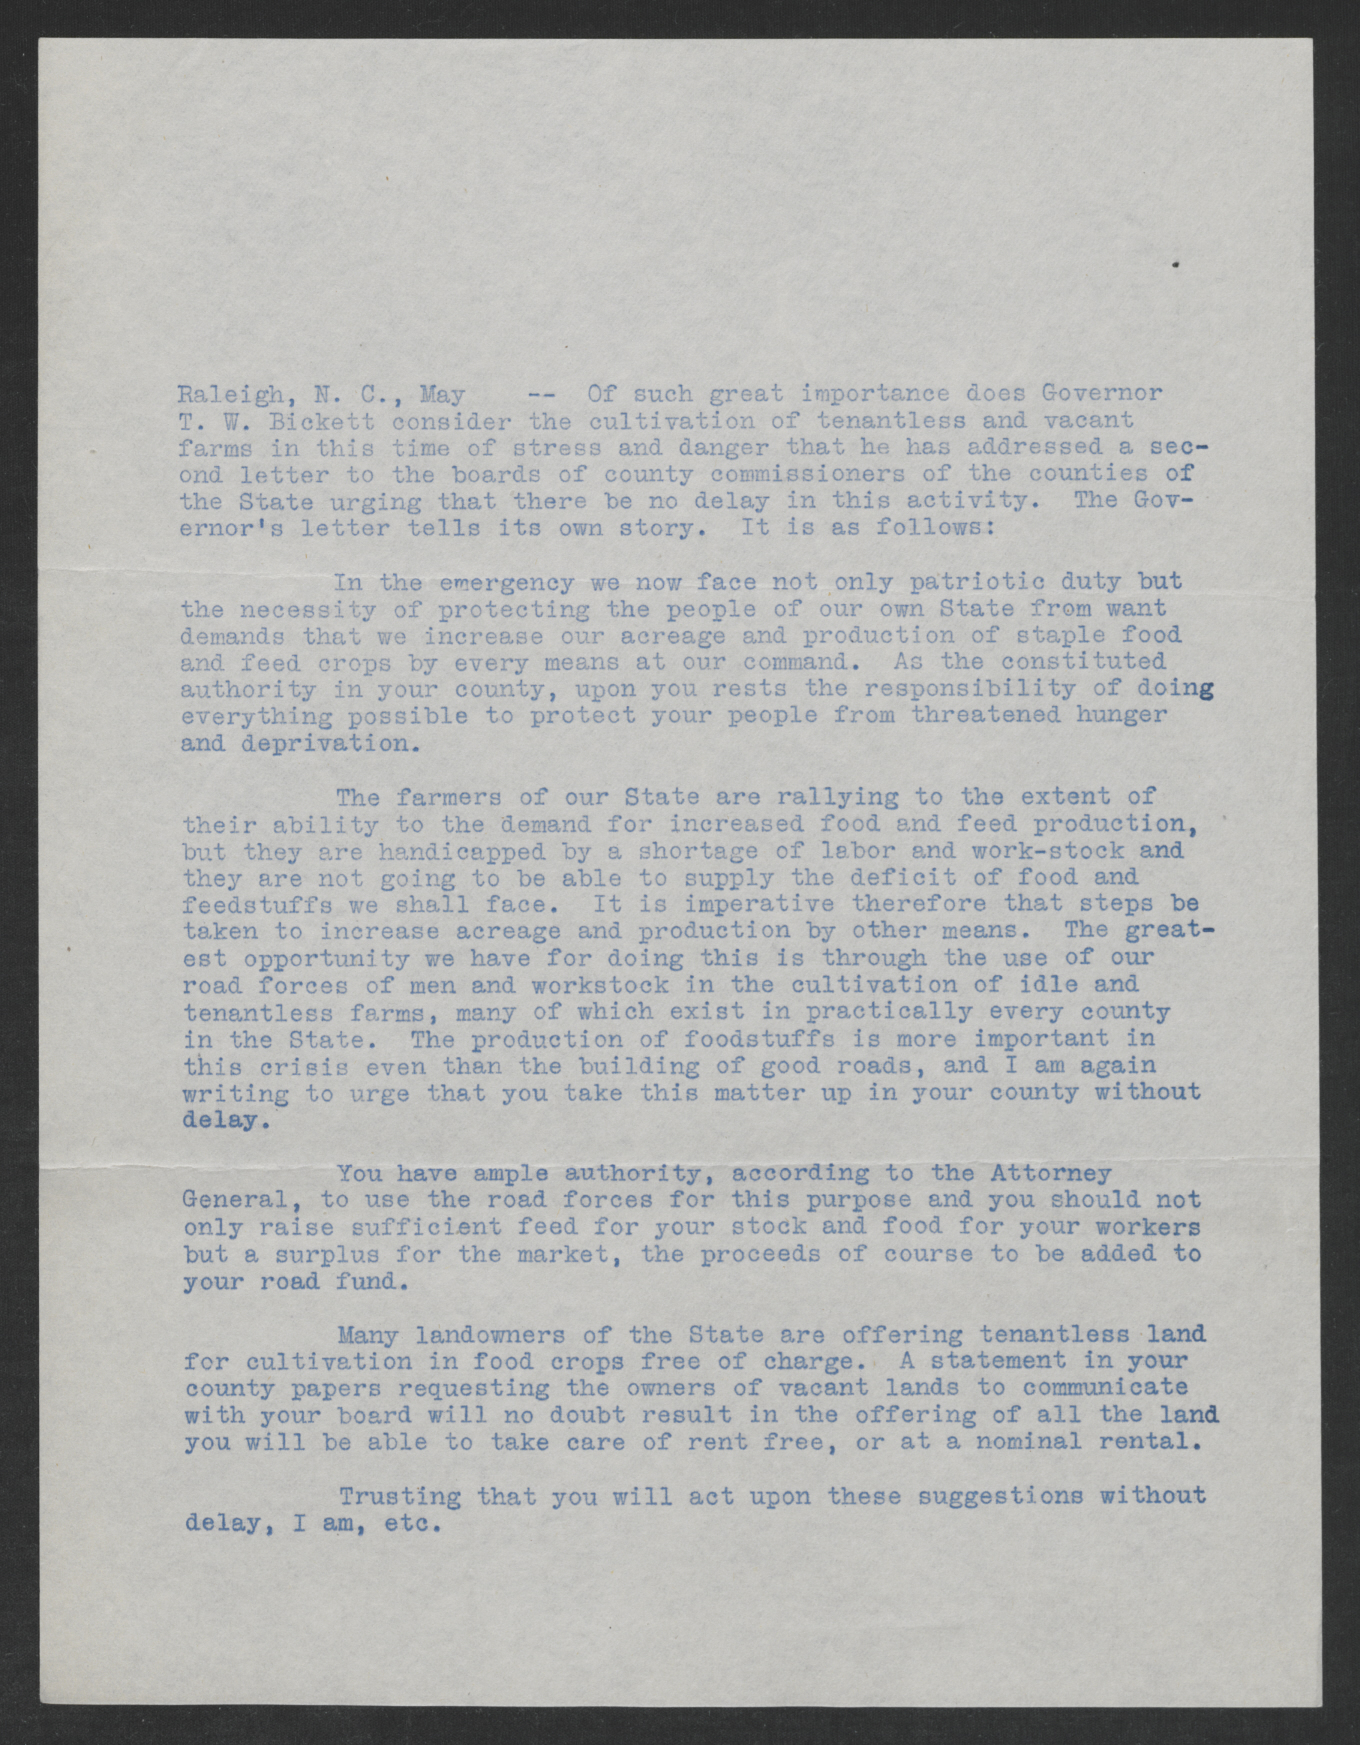 Letter from Thomas W. Bickett to the Boards of County Commissioners, May 1917